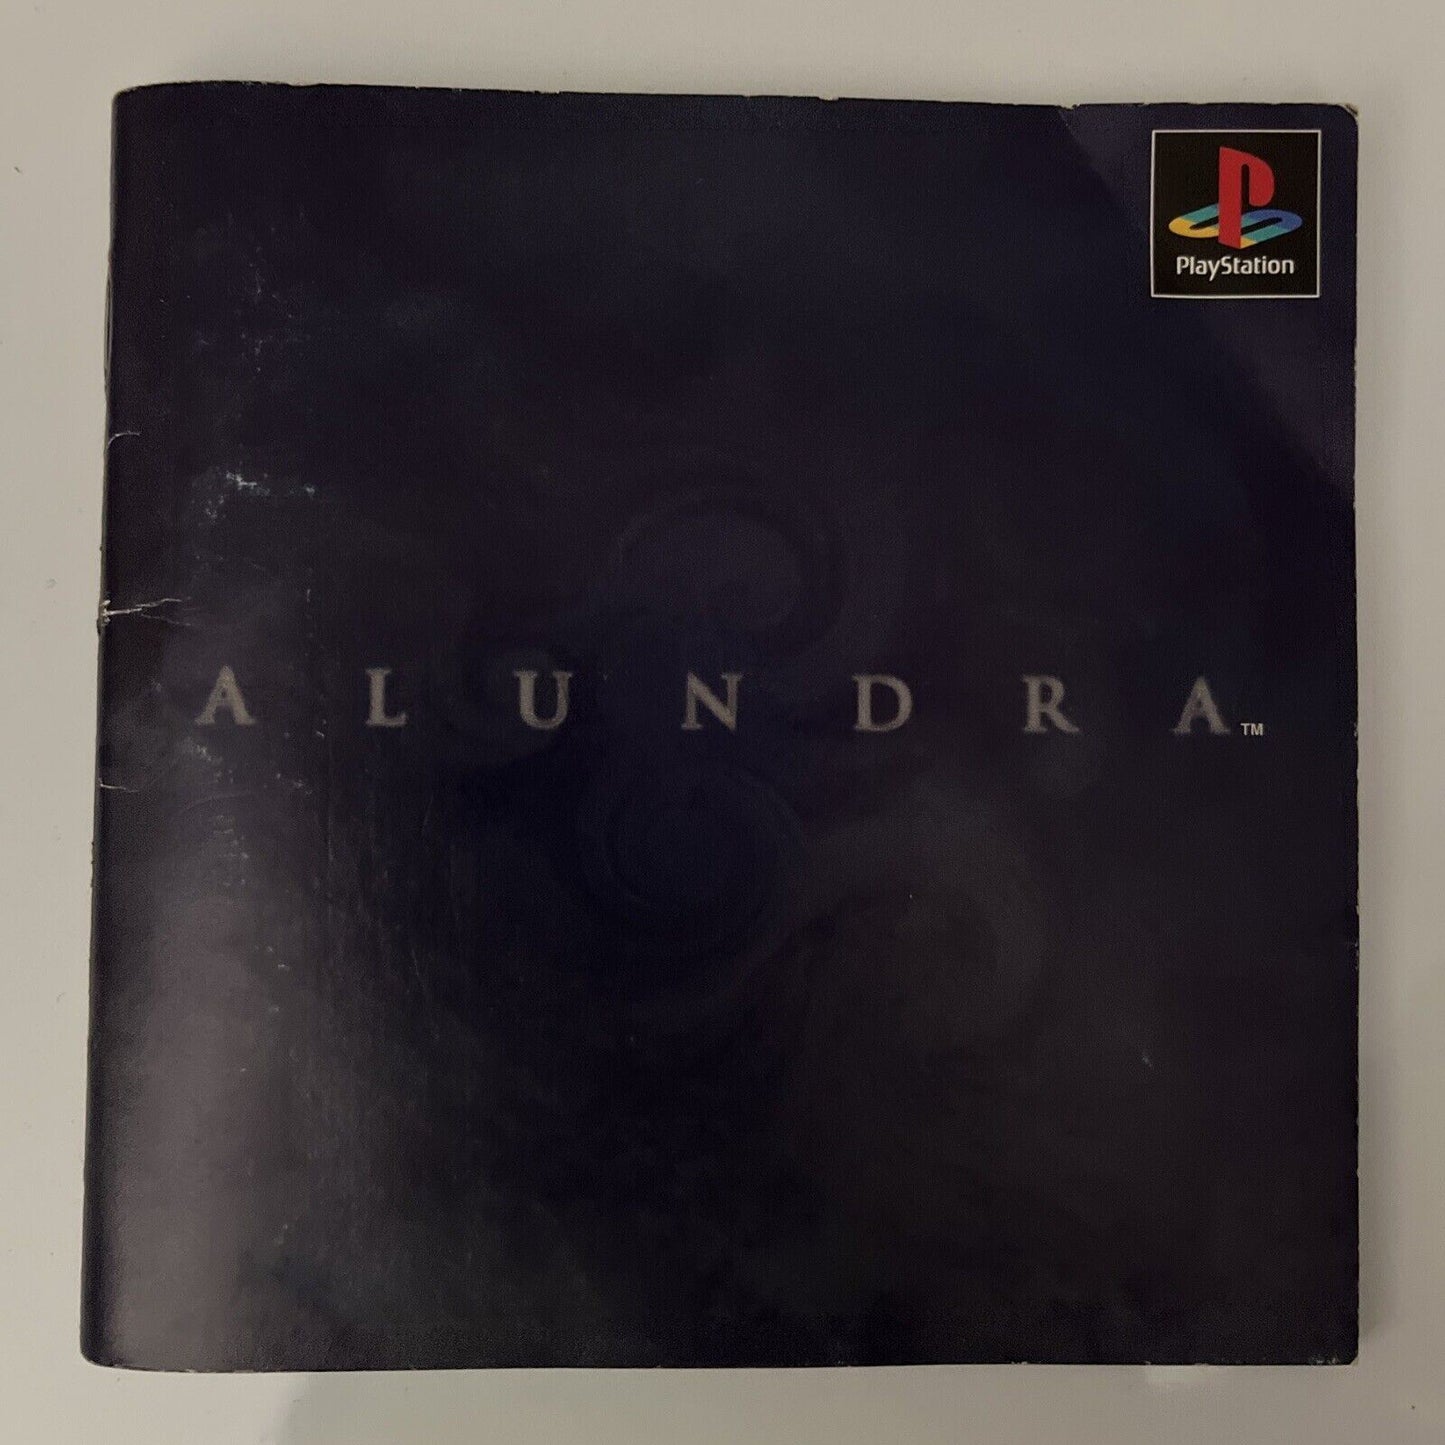 Alundra - Sony PlayStation PS1 NTSC-J JAPAN Action RPG 1997 Game